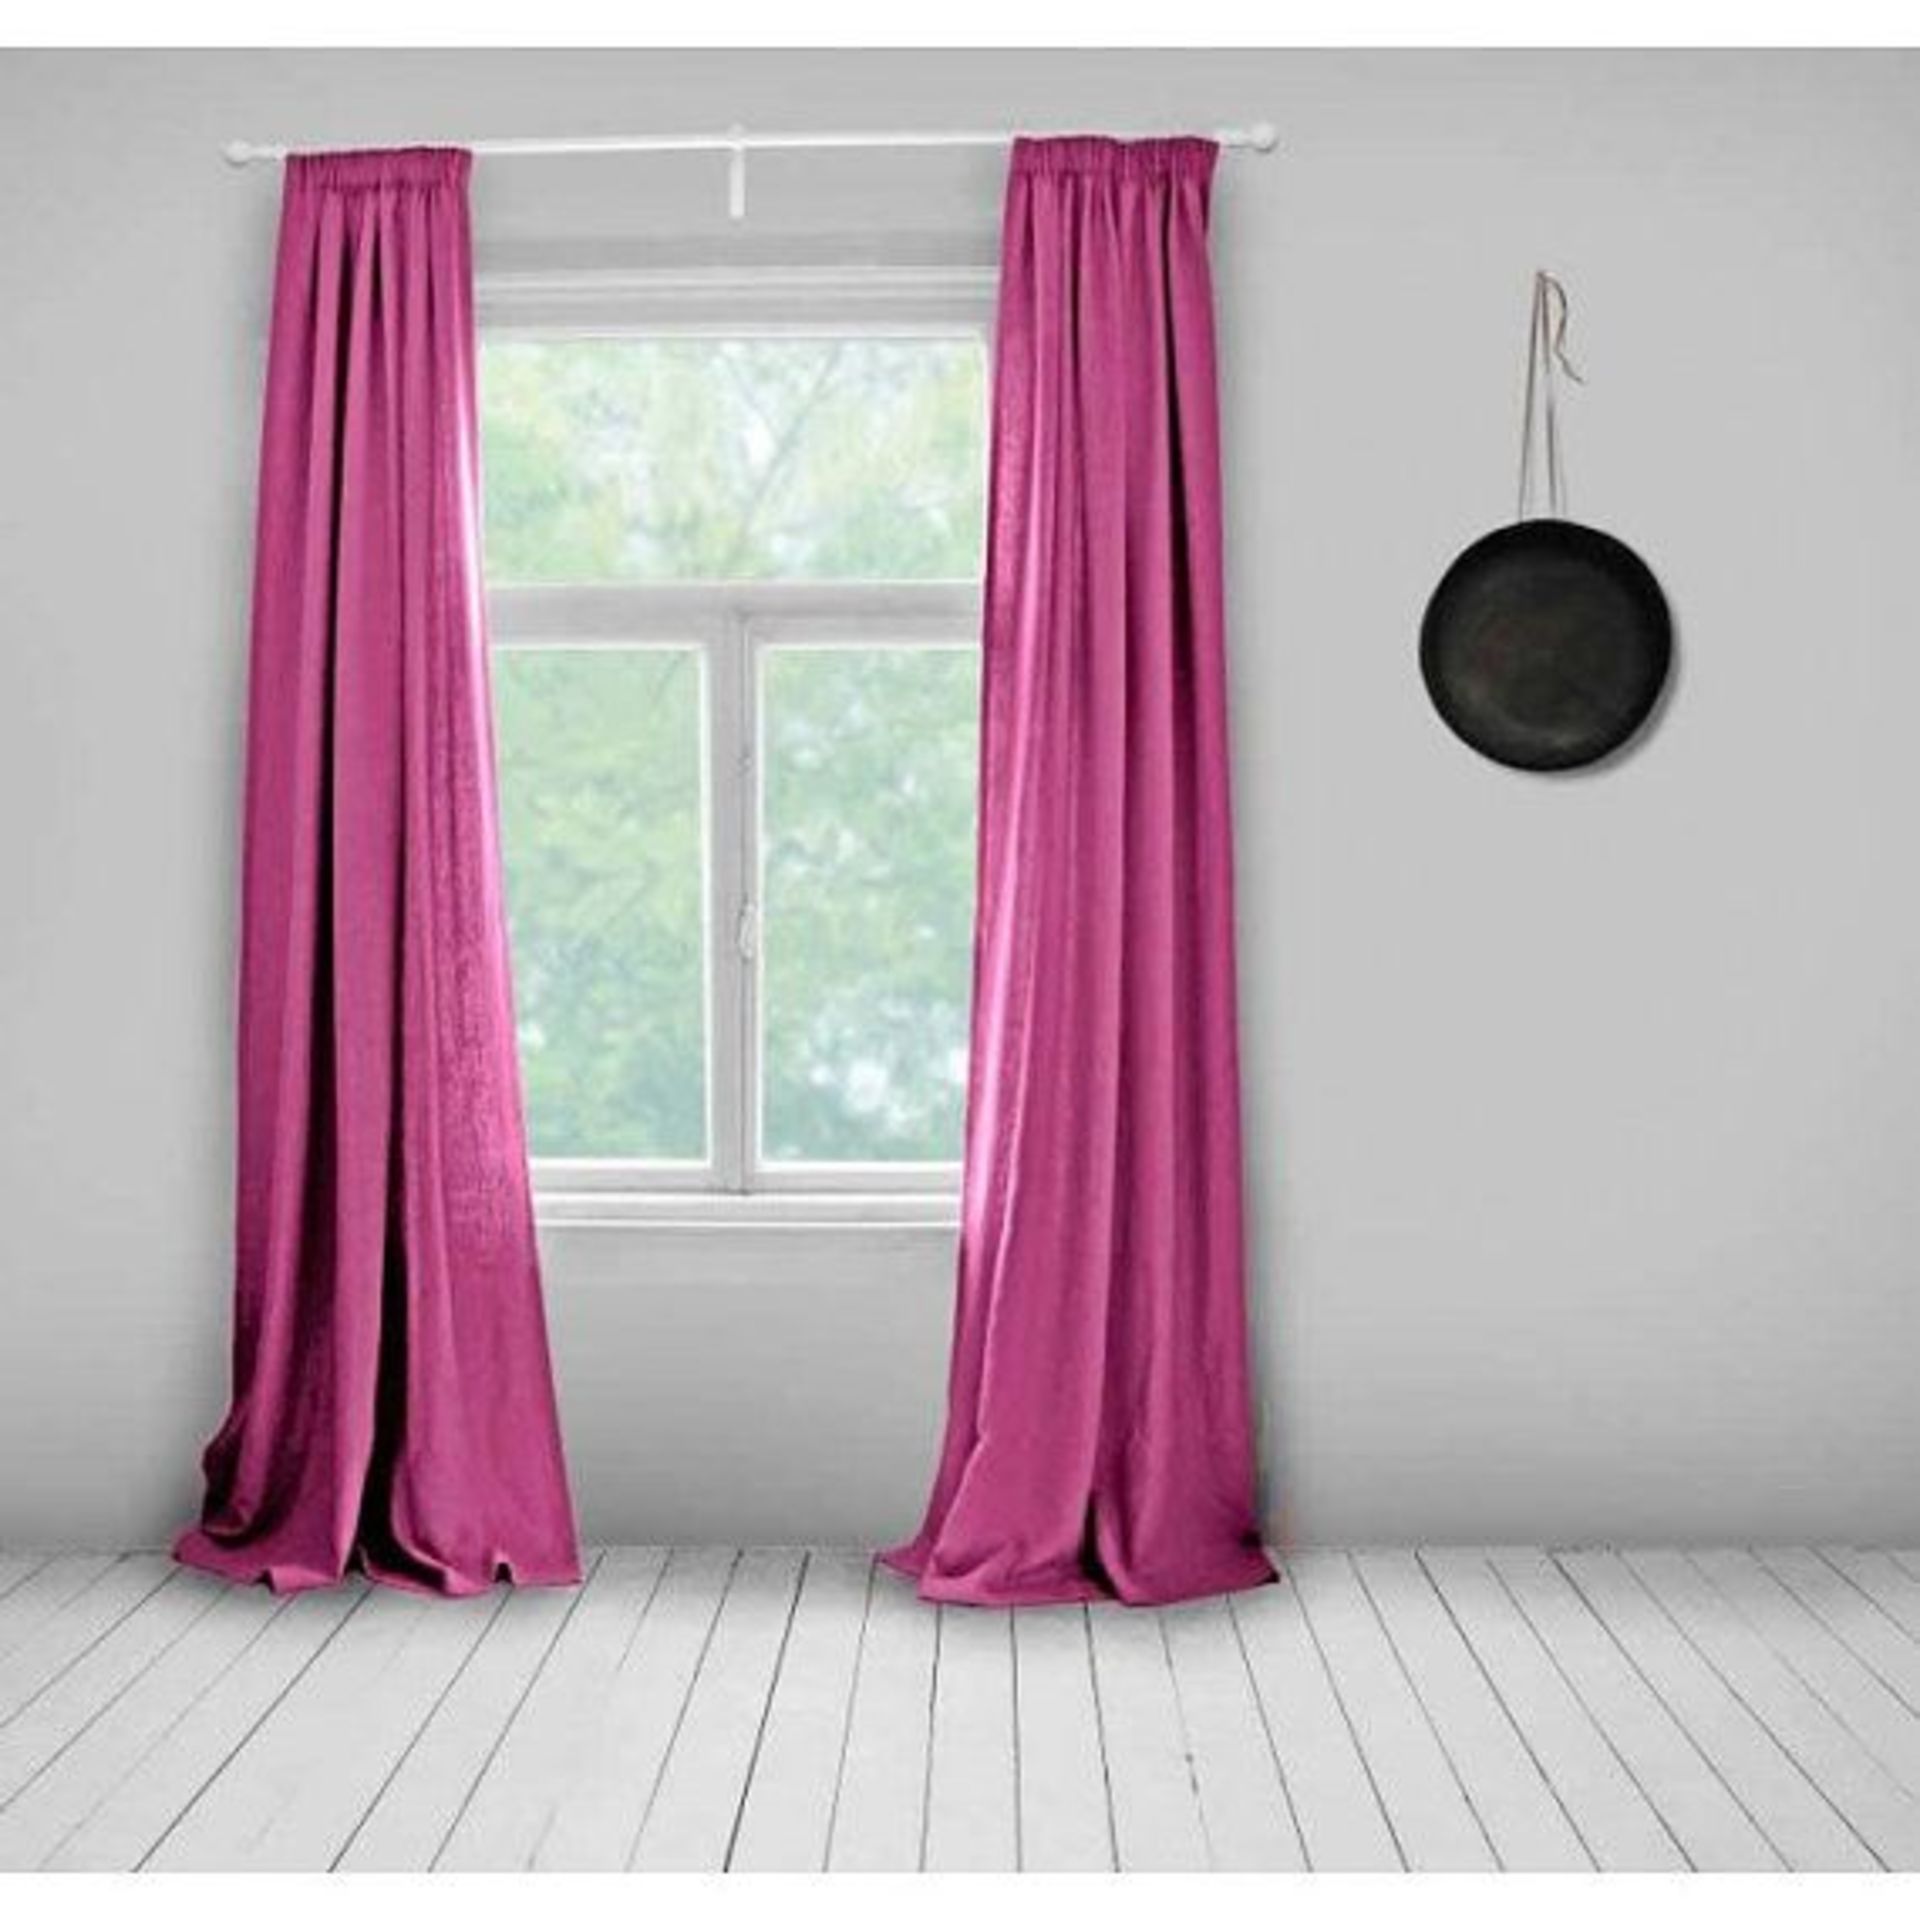 SLEEP & DREAM FULLY LINED CURTAINS 66X72 INCHES (DELIVERY BAND A)